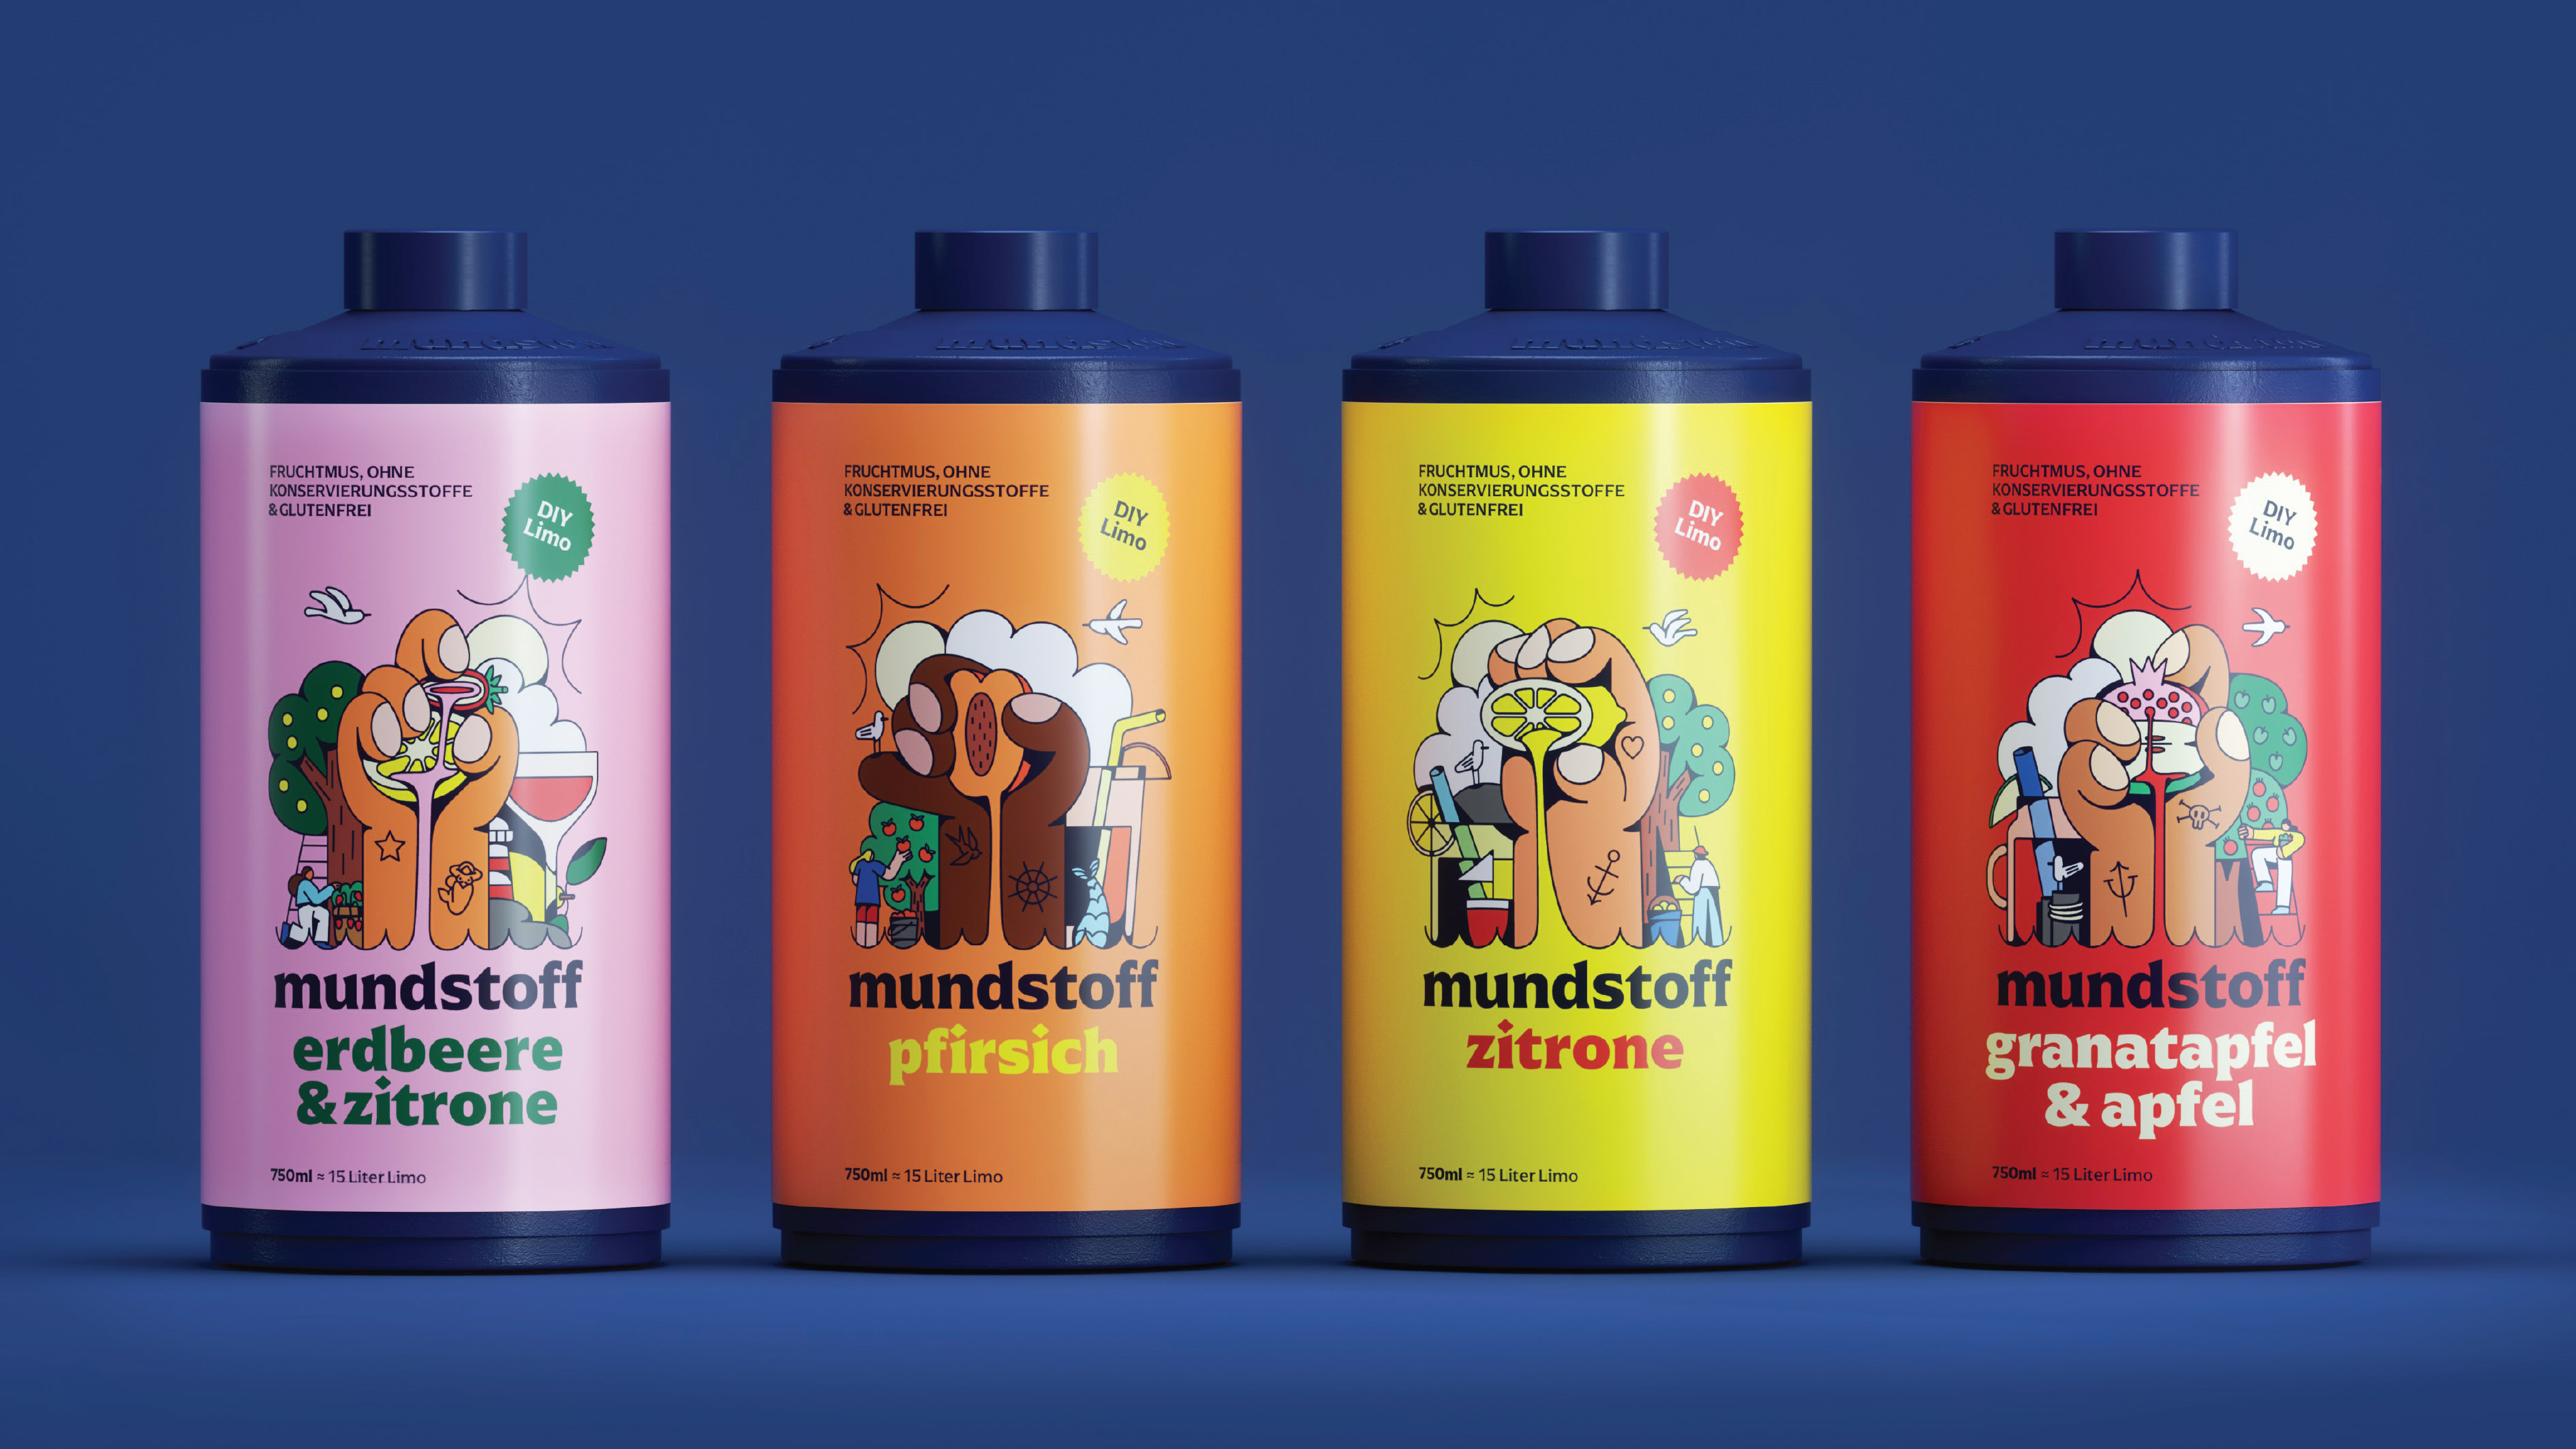 Mundstoff Creates a Sea of Flavour and Packaging Design by Slab Design Studio